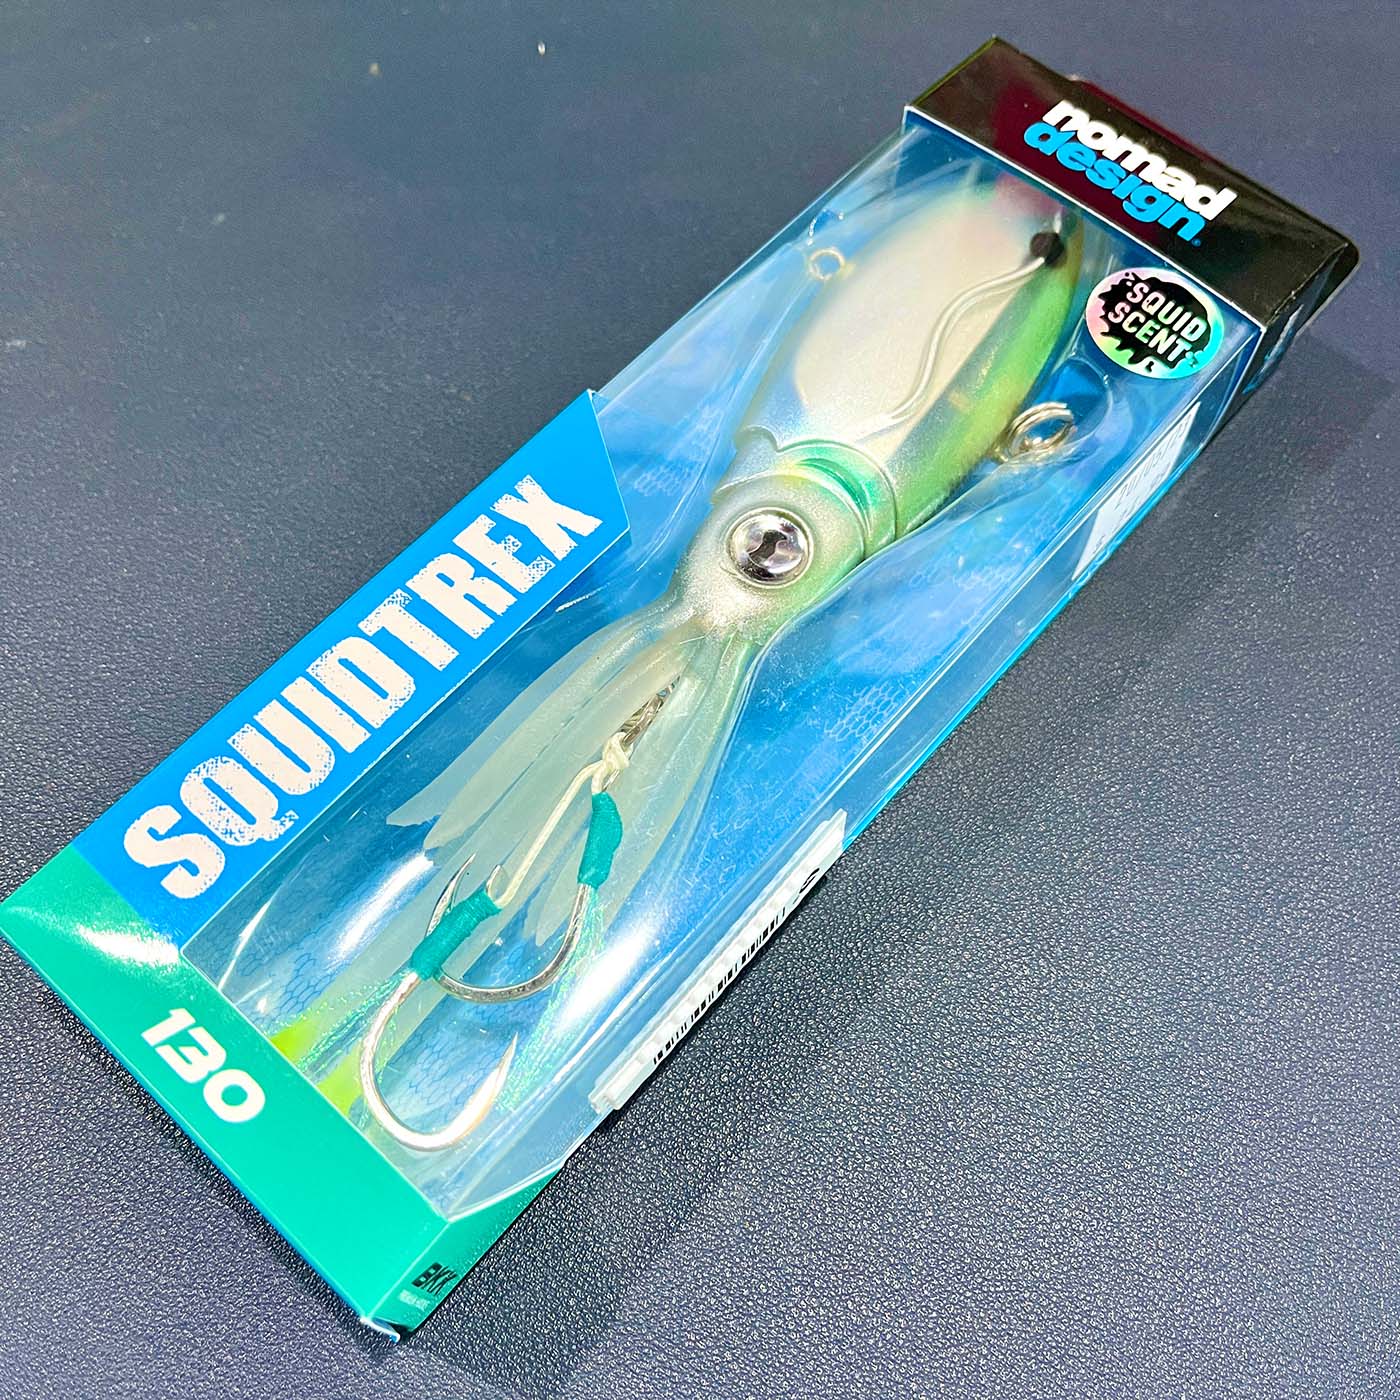 Compleat Angler Ringwood - Just Landed - Nomad Design Squidtrex 55 and 65.  The proven Squidtrex lure design is now available in both a 55mm (5 gram)  and 65mm (8 gram) version.